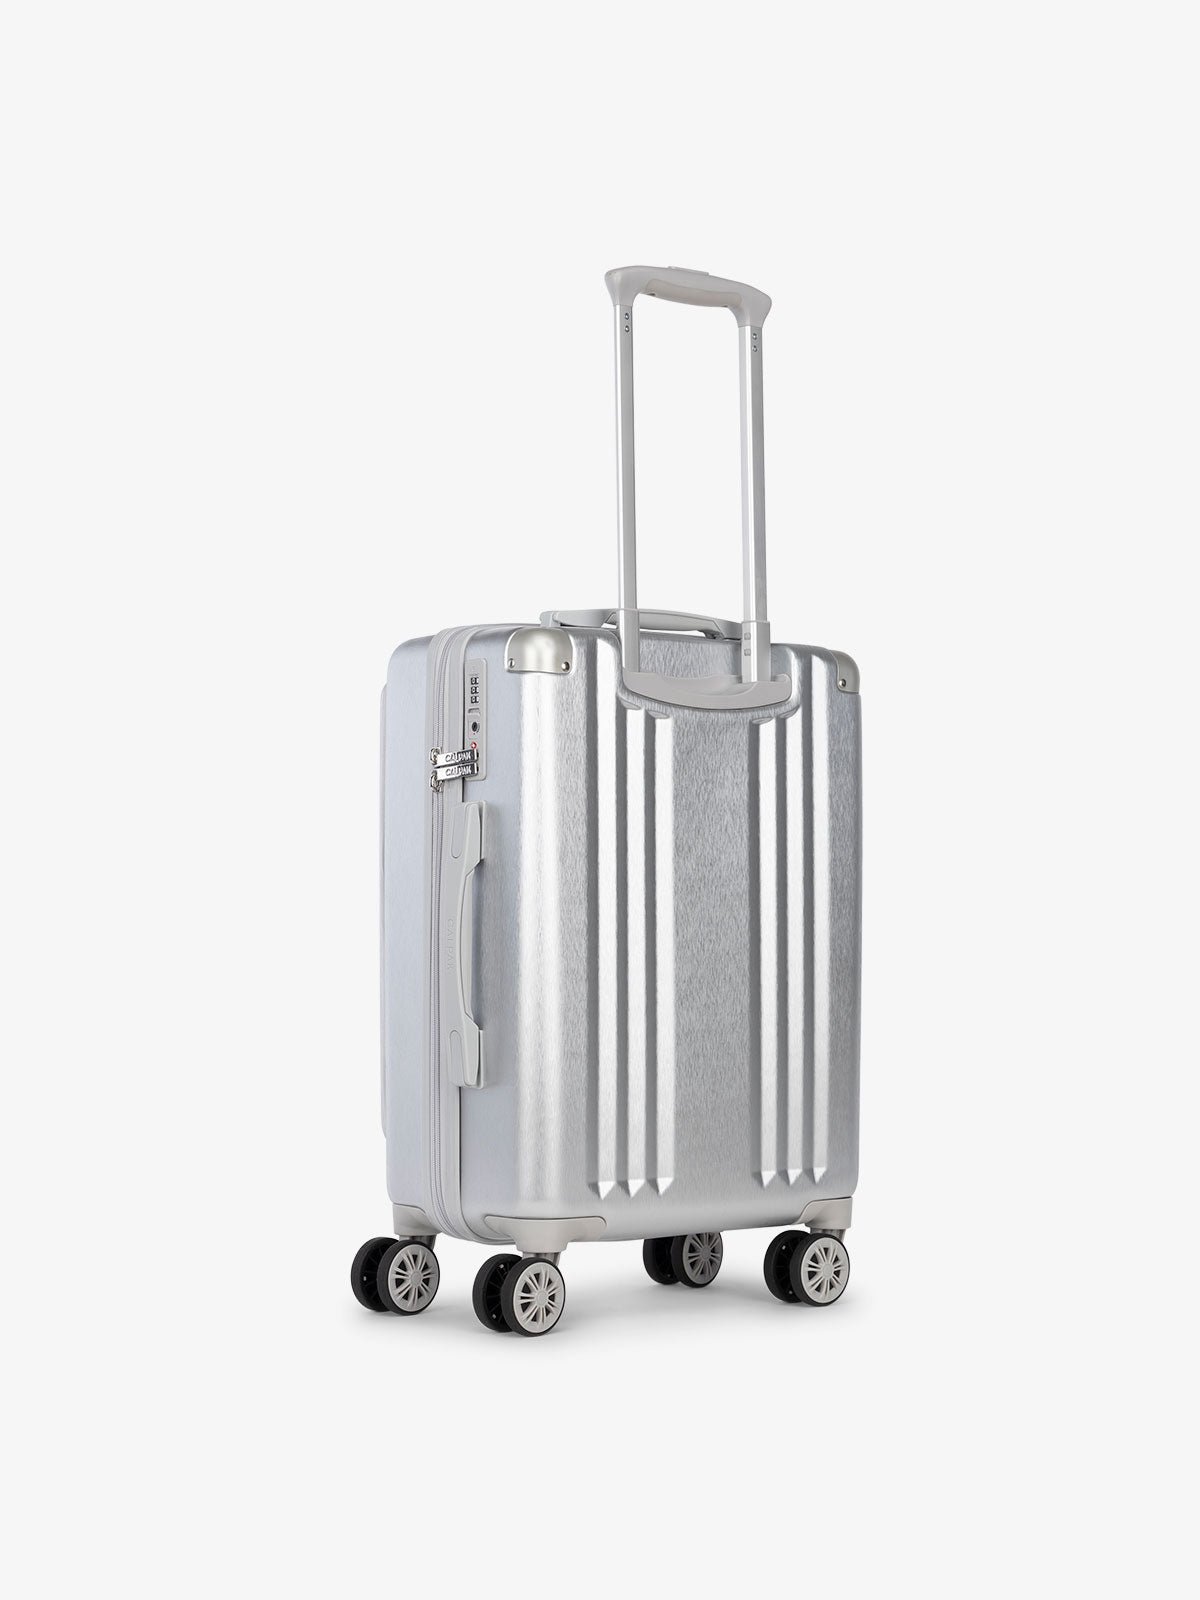 CALPAK Ambeur lightweight carry-on luggage with laptop front pocket, TSA lock and 360 spinner wheels in silver